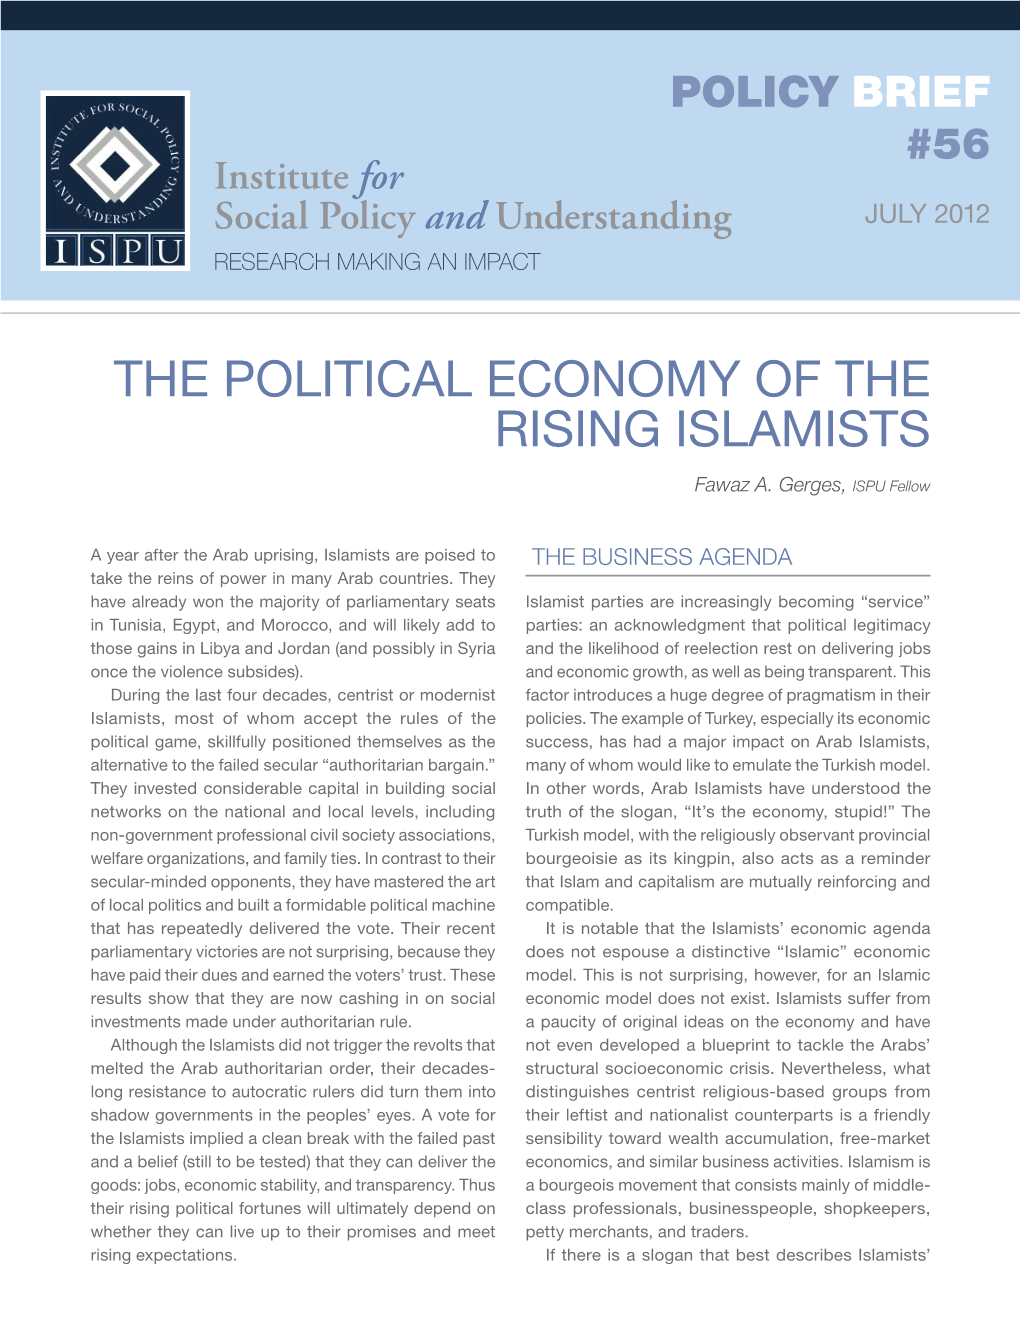 The Political Economy of the Rising Islamists